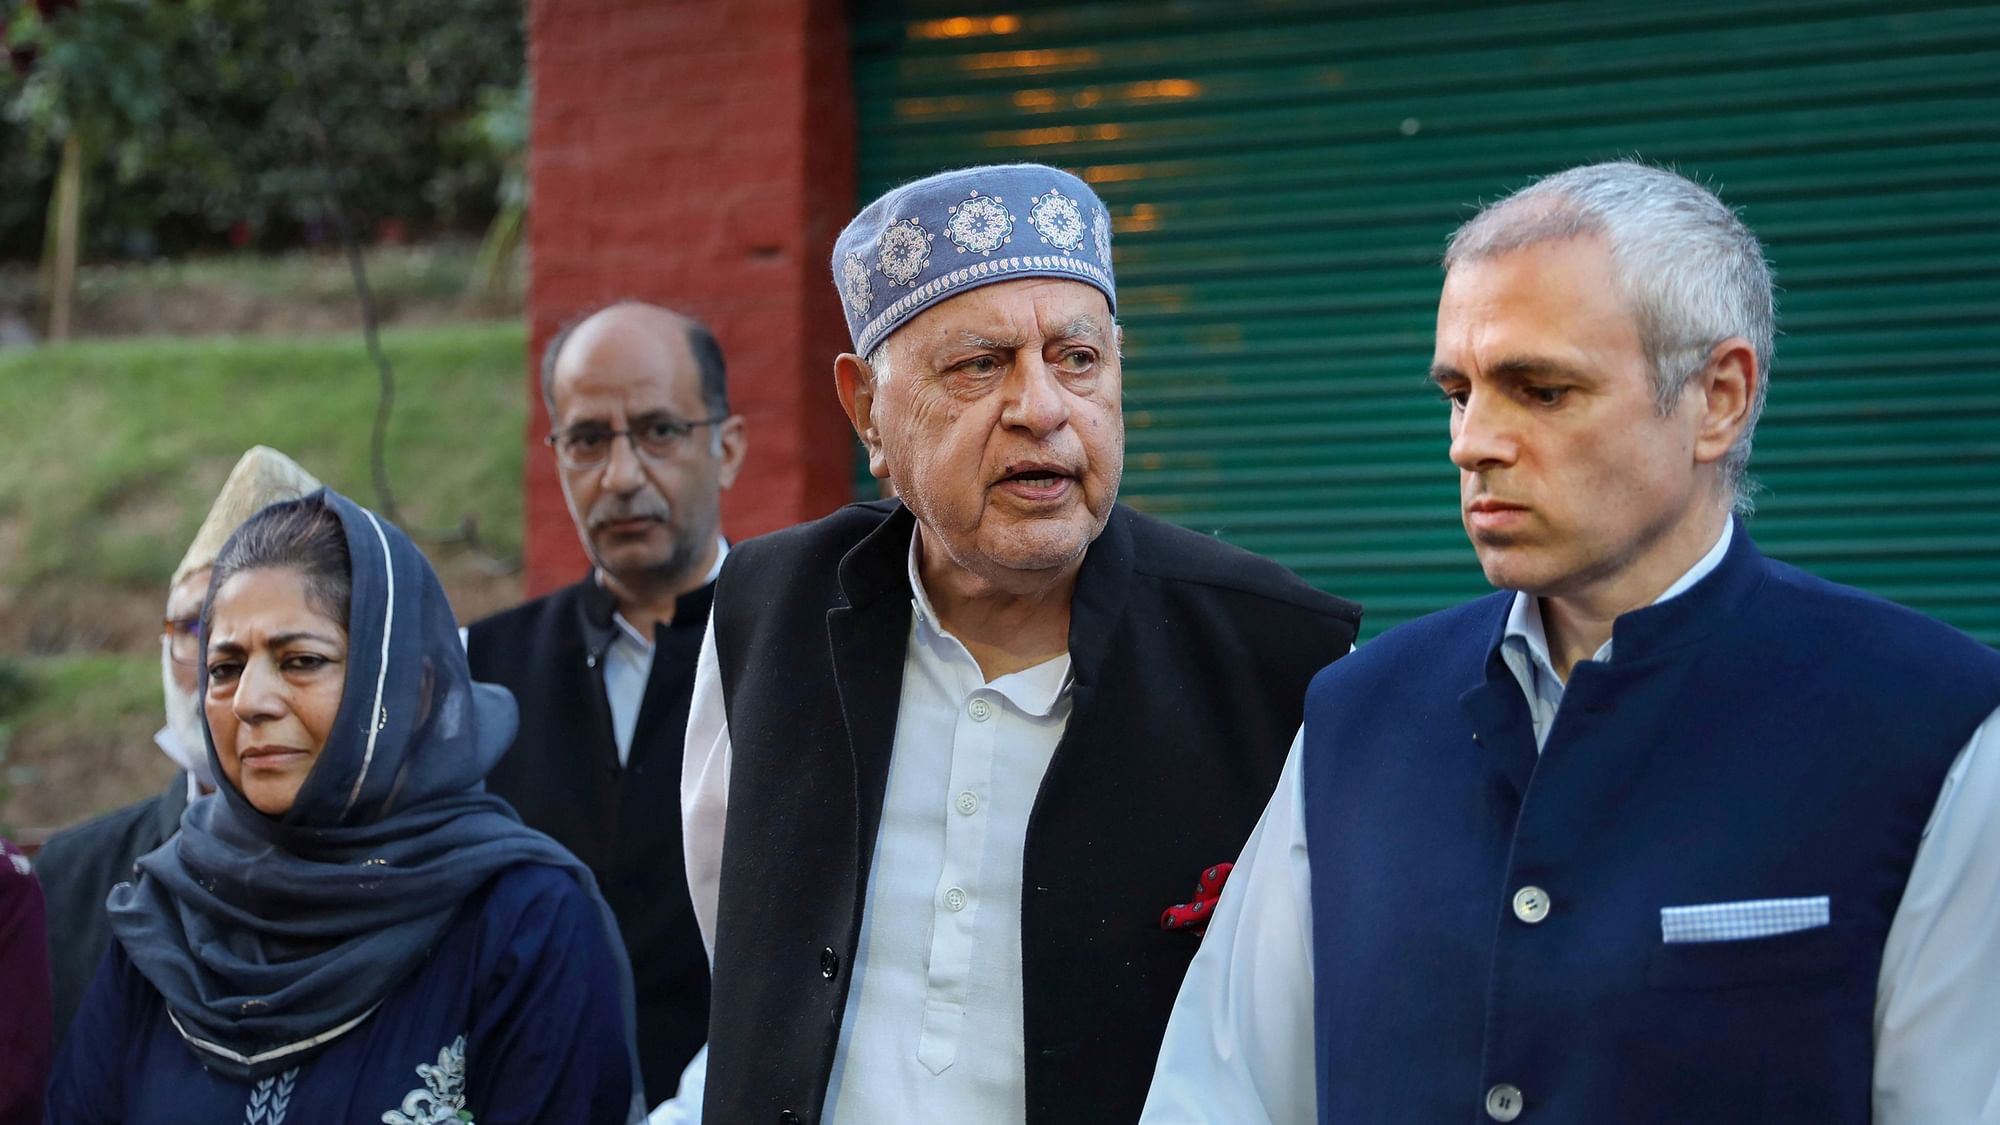 Jammu and Kashmir National Conference President Farooq Abdullah addresses a press conference along with his son Omar Abdullah, Peoples Democratic Party (PDP) President Mehbooba Mufti and others after meeting of signatories to the Gupkar declaration, at his residence in Srinagar, Thursday, 15 October, 2020. 